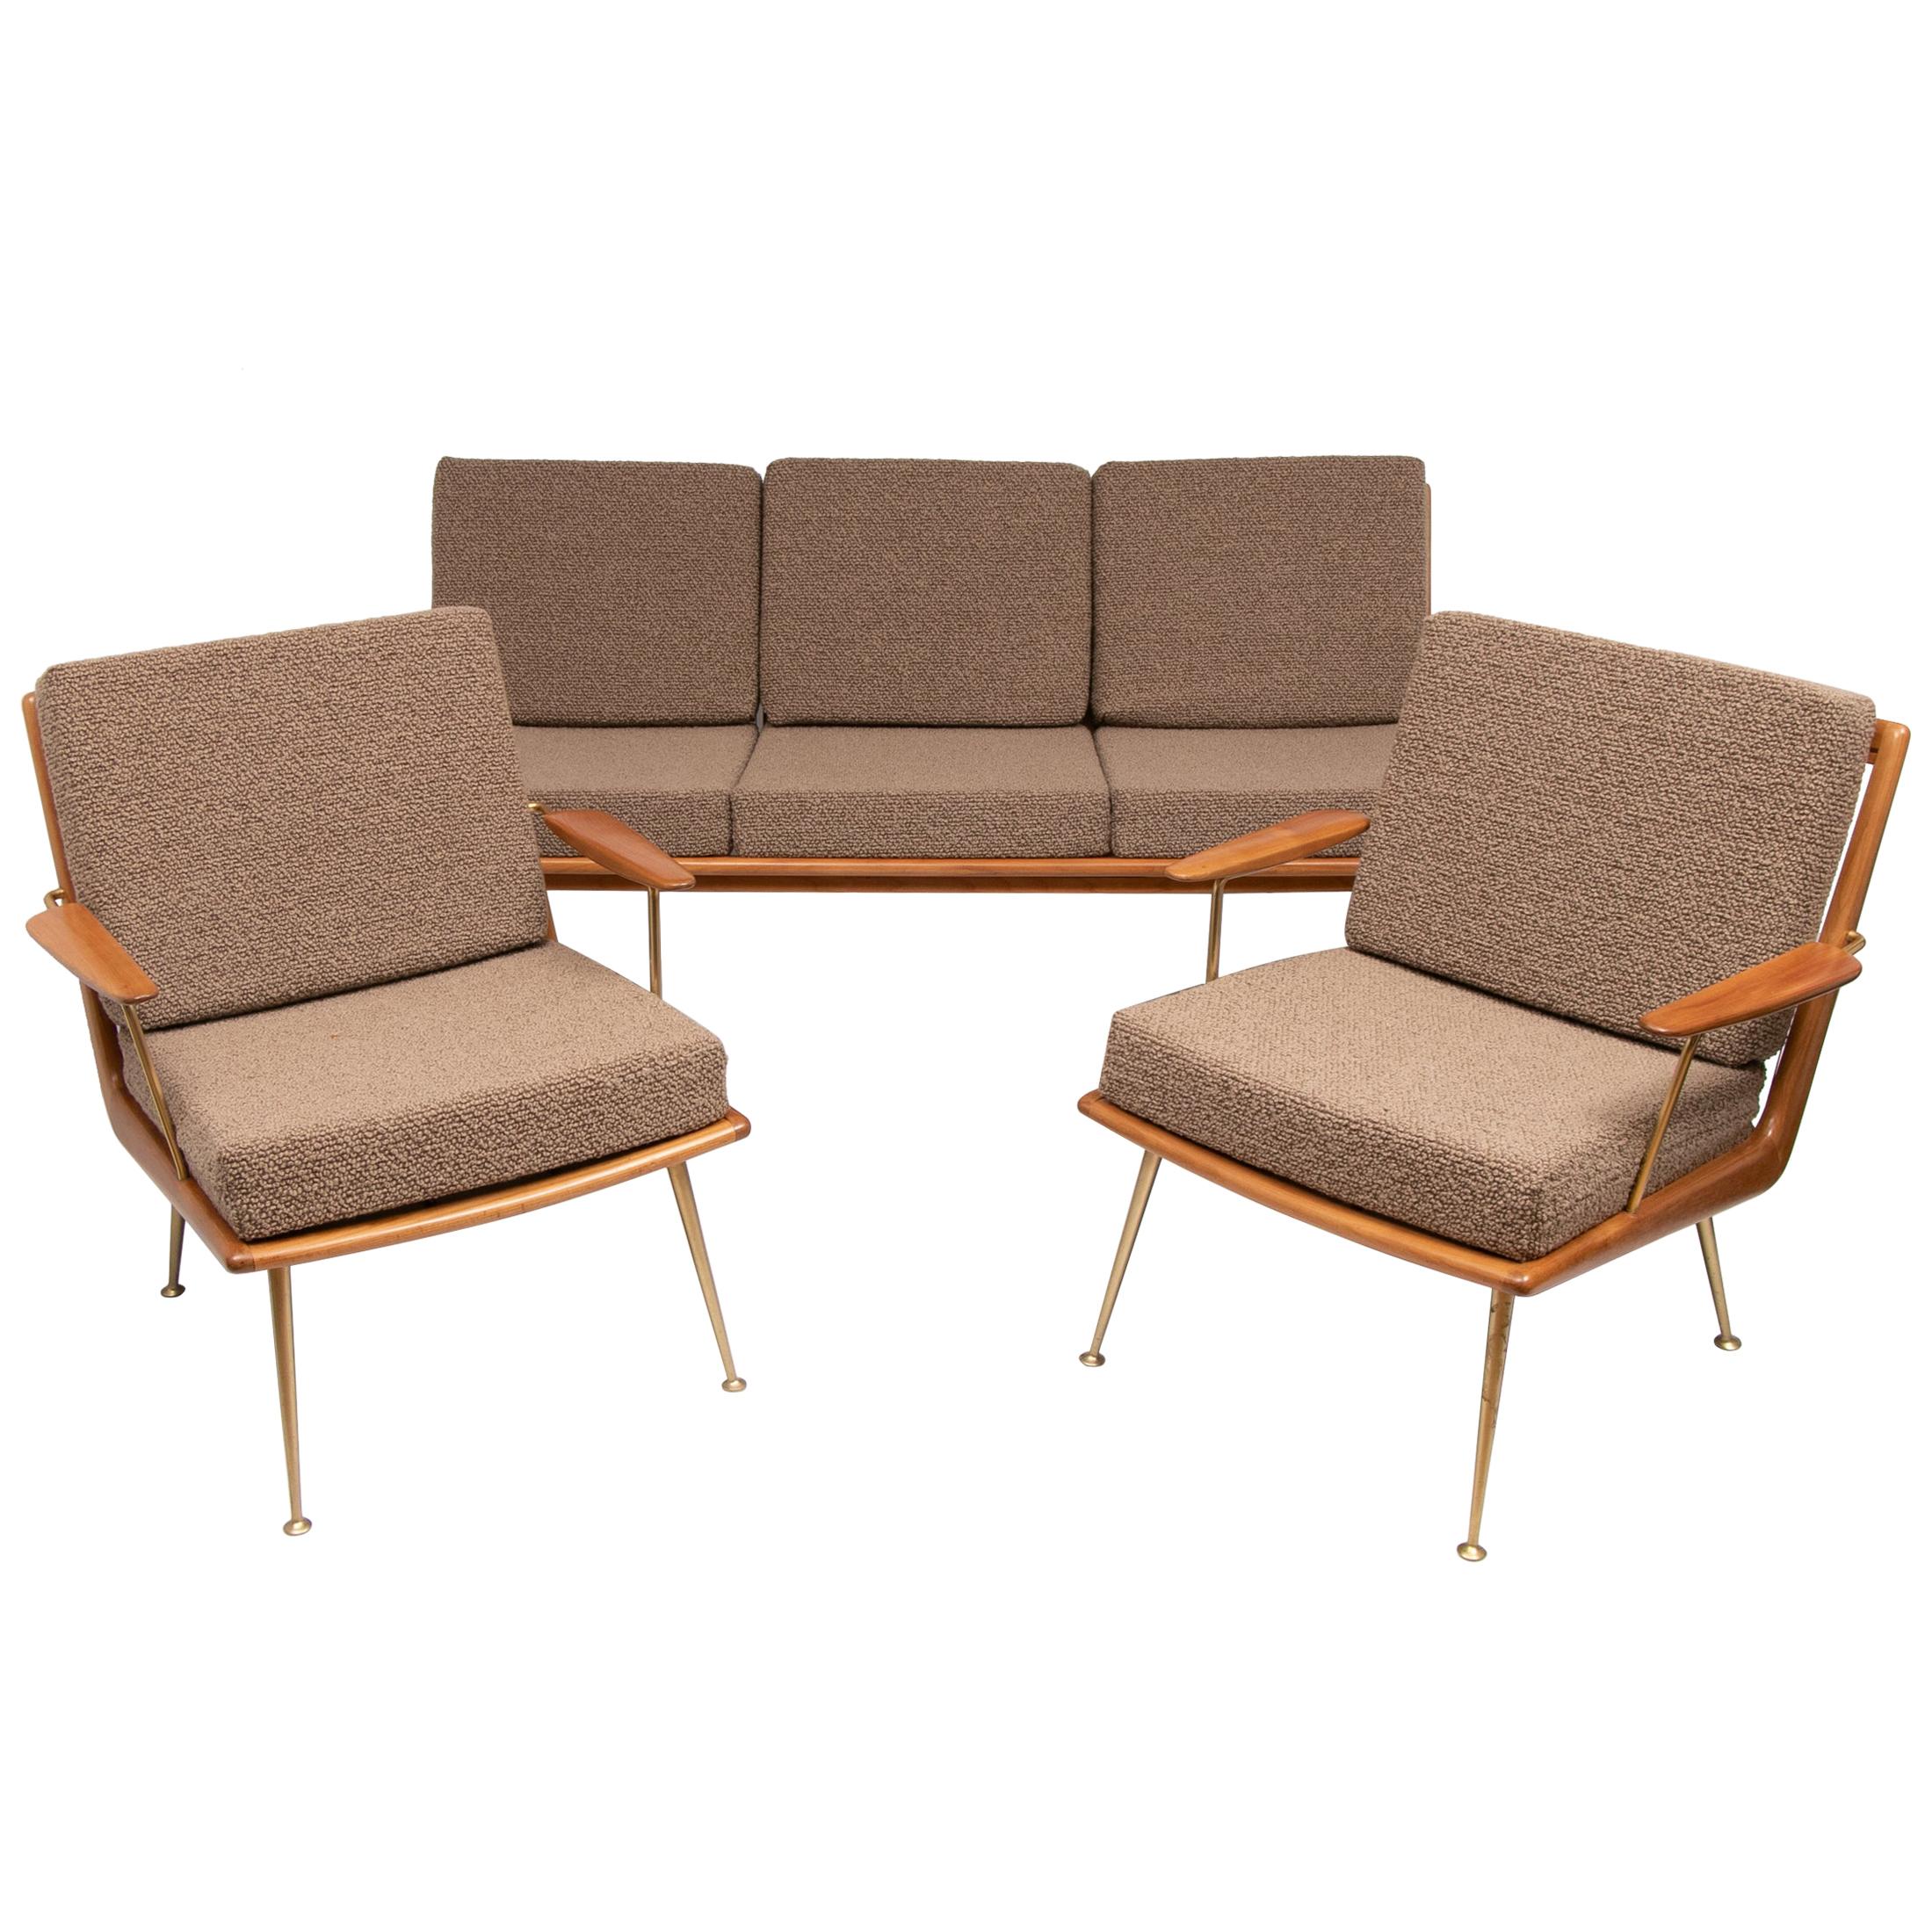 1950s Boomerang Sofa & 2 Easy Chairs by Hans Mitzlaff for Soloform, Germany